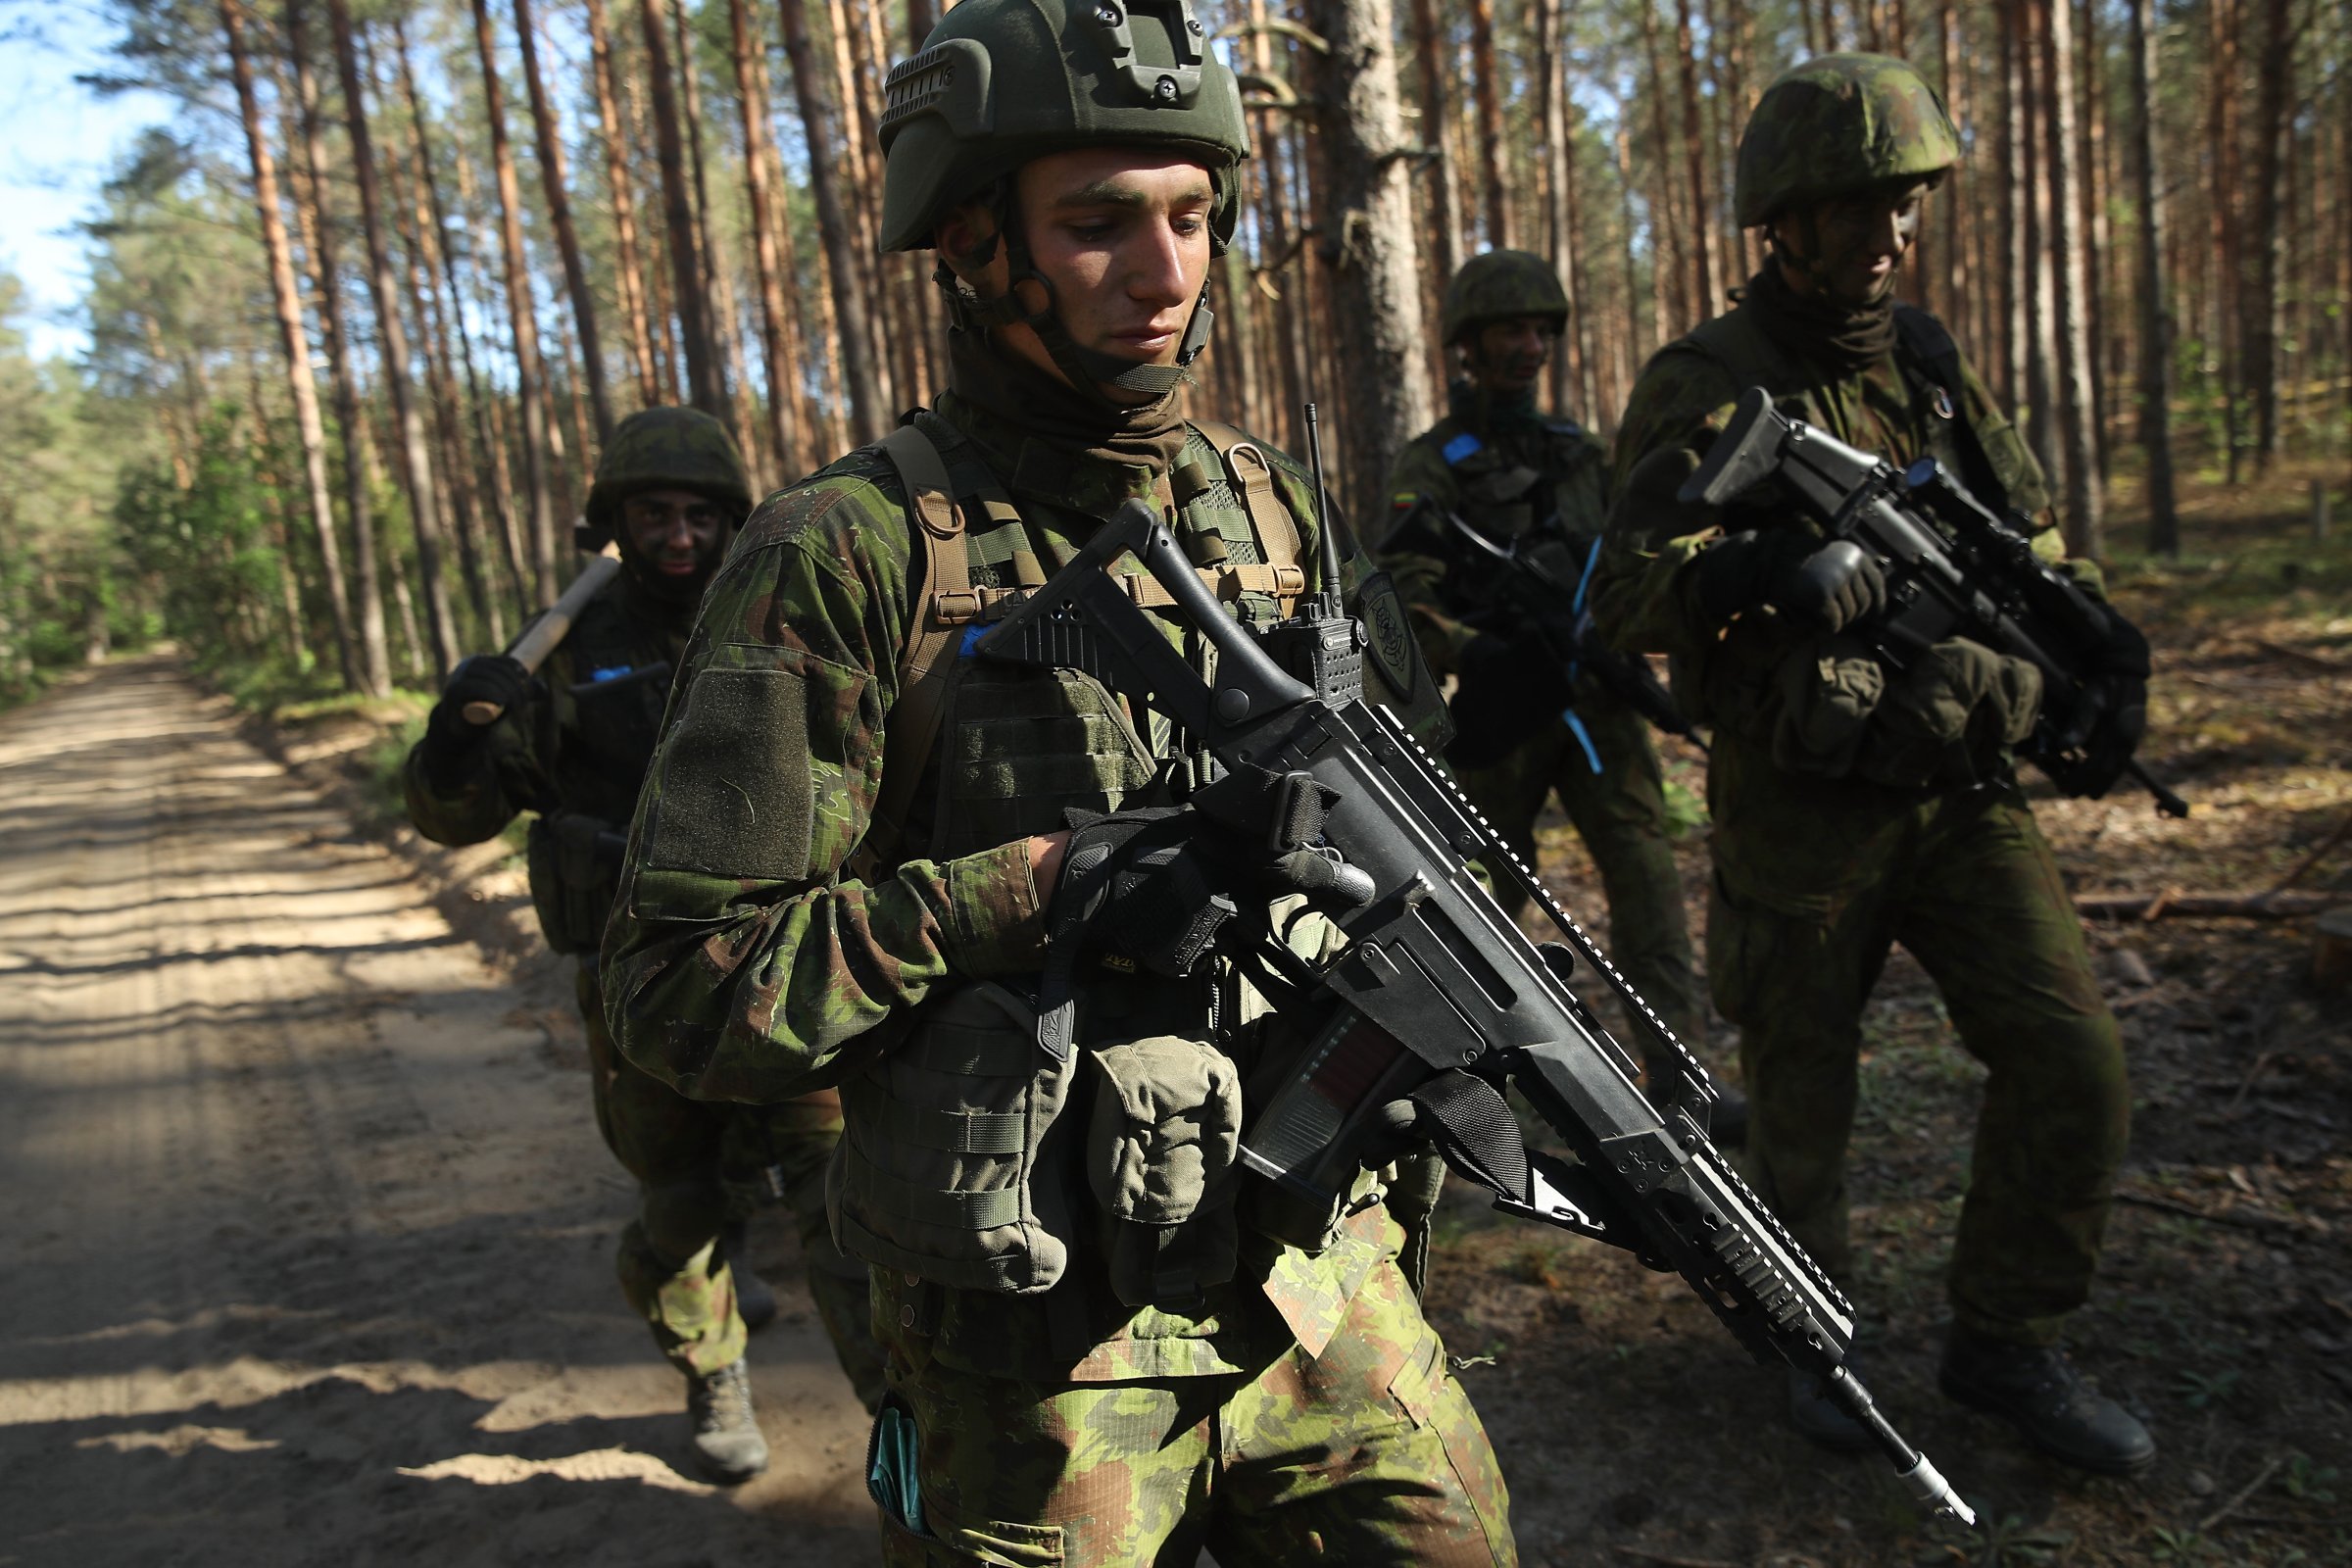 Lithuania Holds 2018 NATO Military Exercises